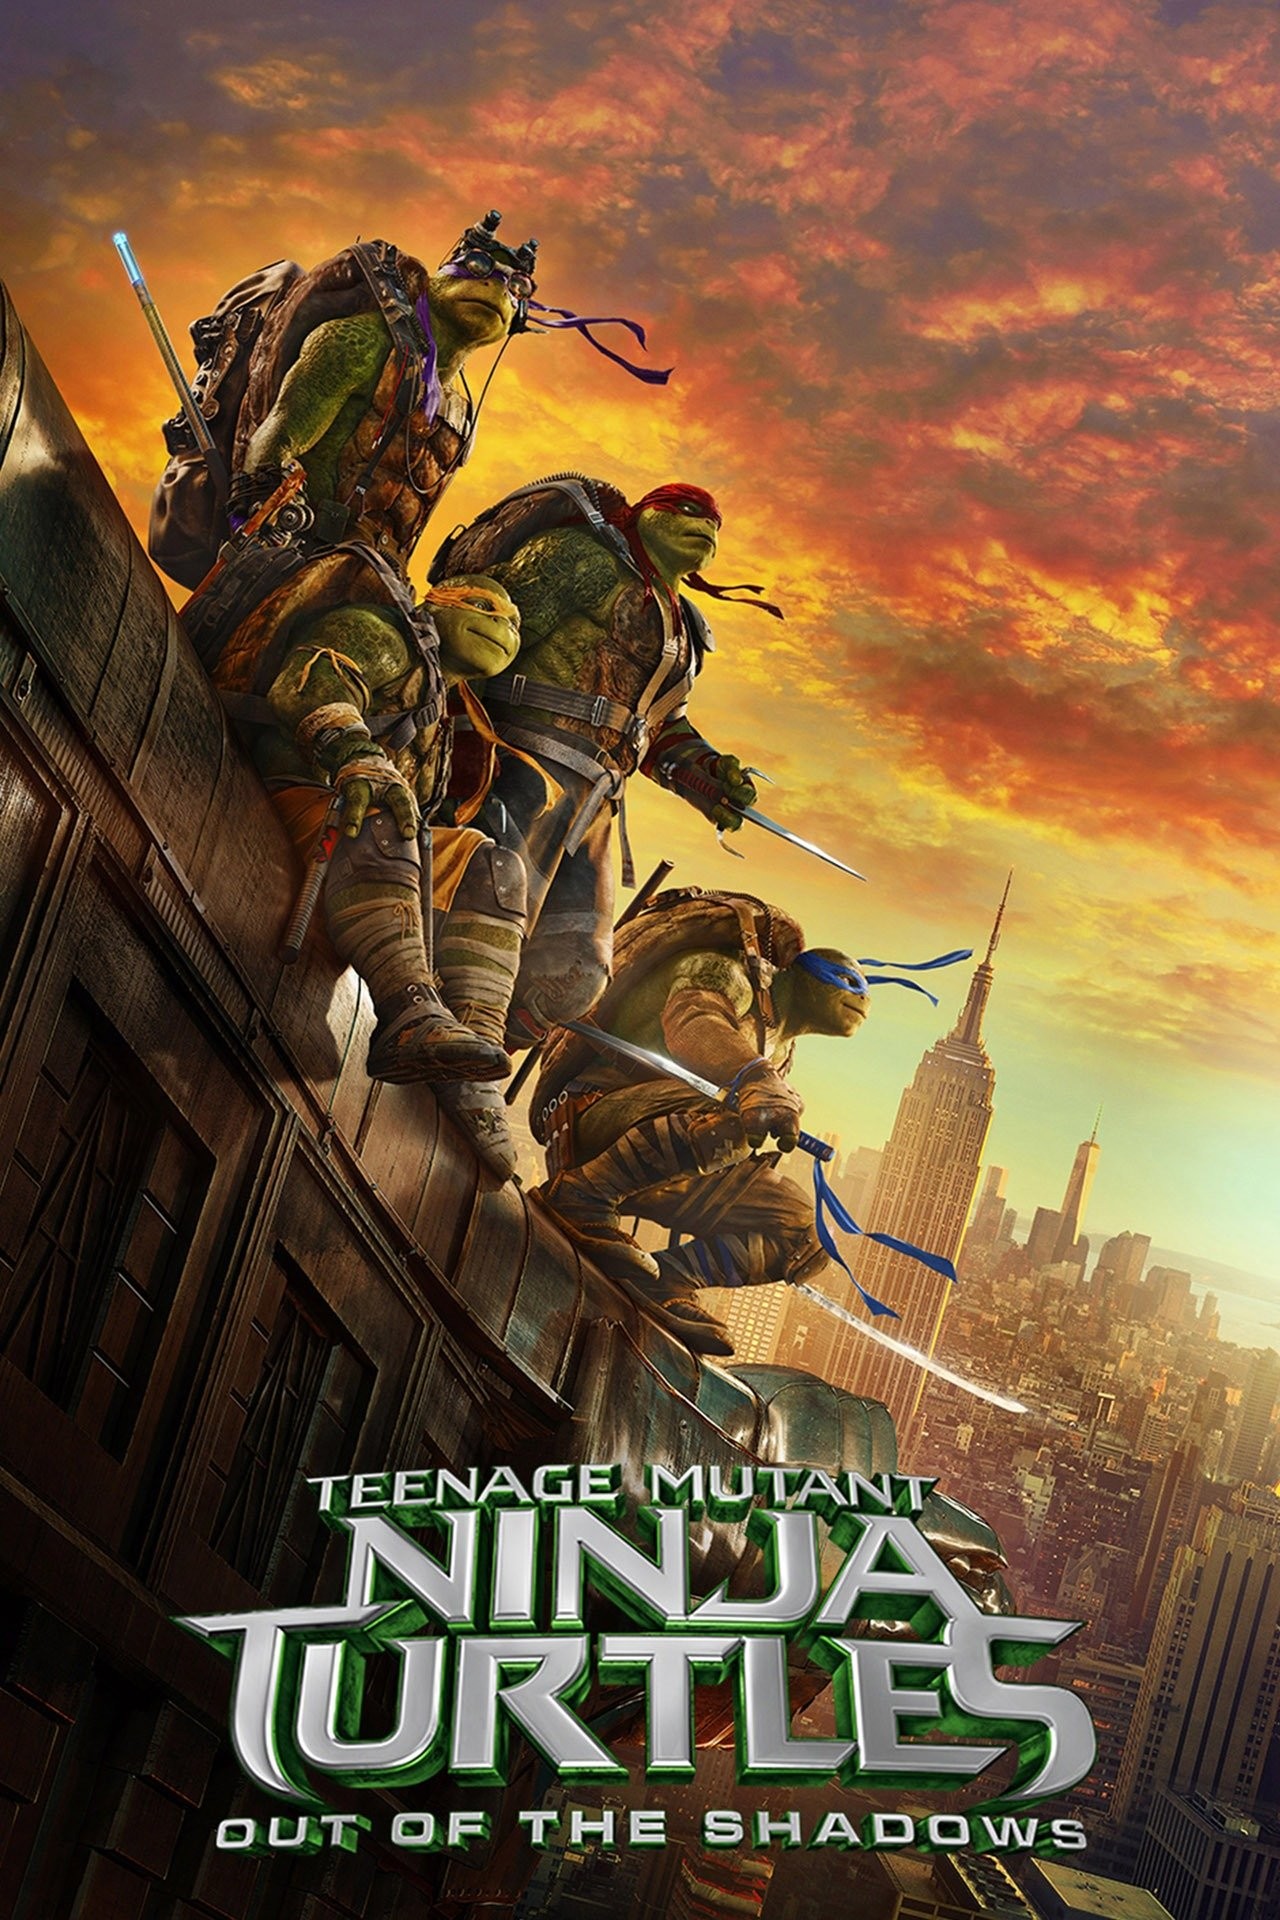 Teenage Mutant Ninja Turtles: Out of the Shadows - Rotten Tomatoes